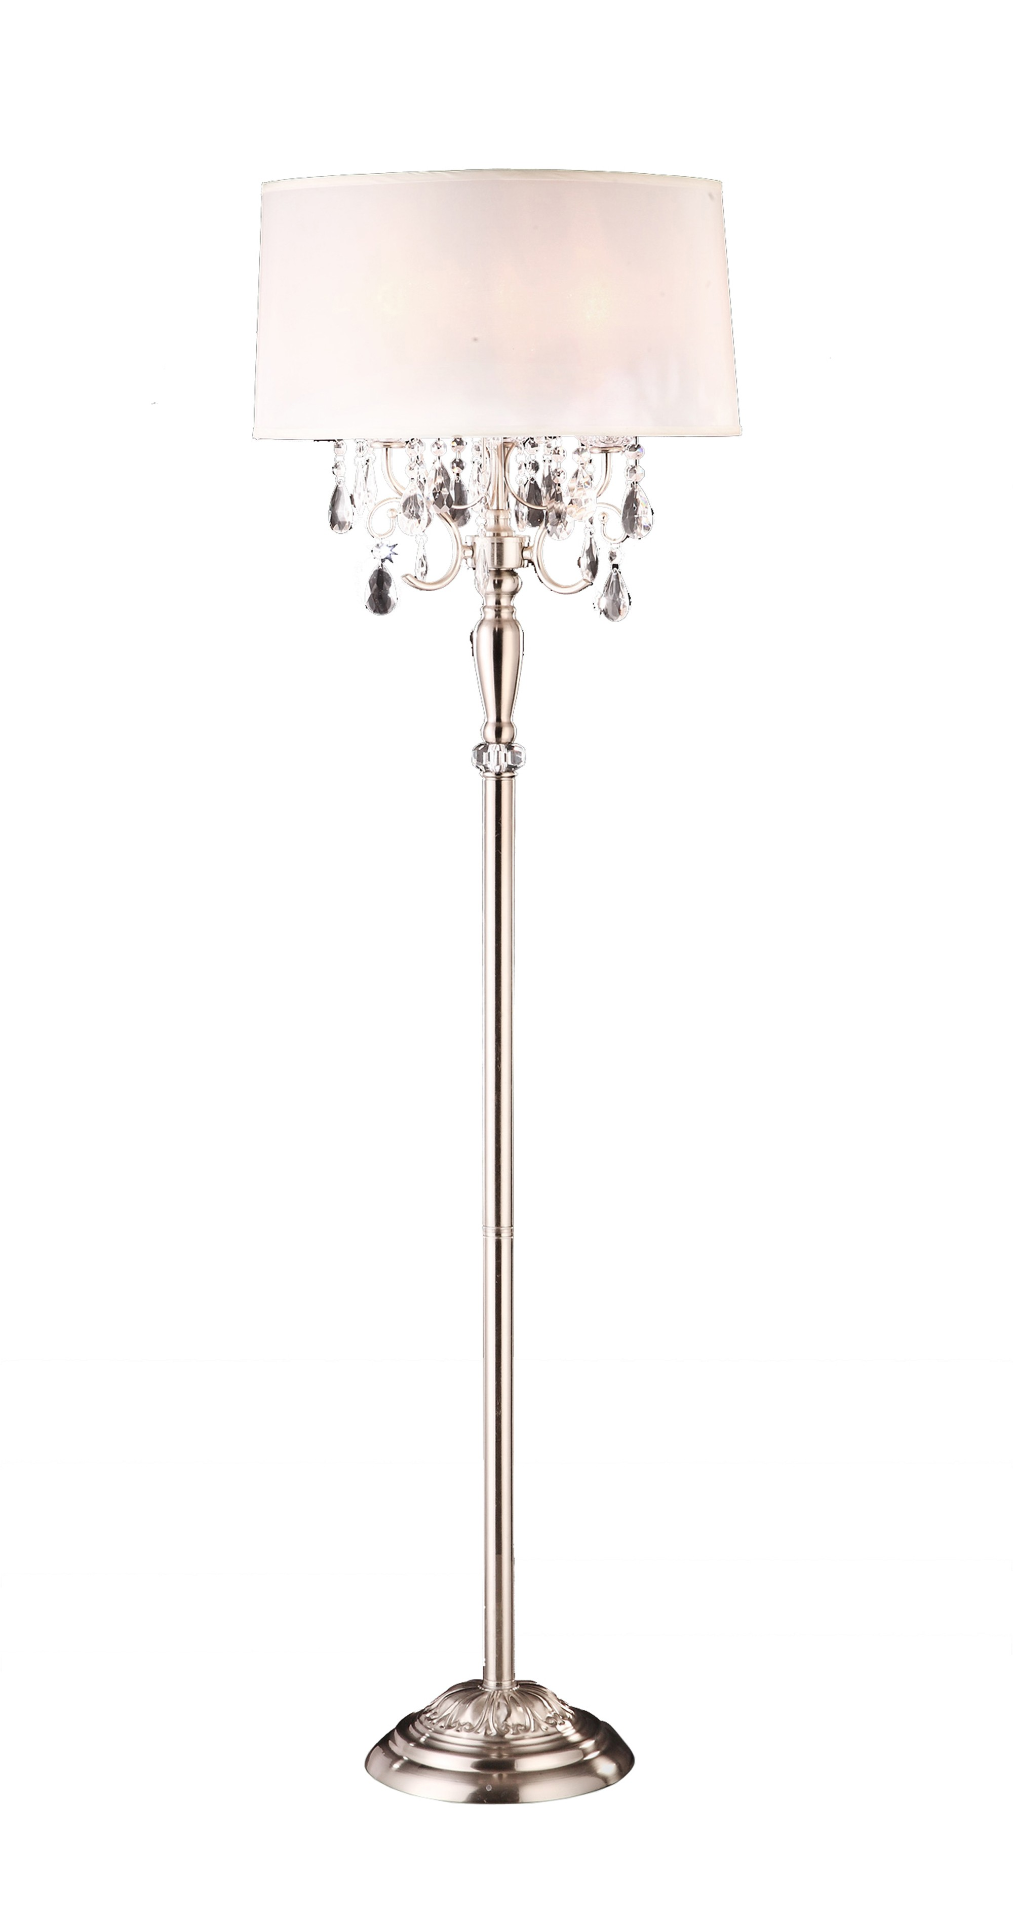 Stylish Floor Lamp With White Shade & Crystal Accents (62"H)